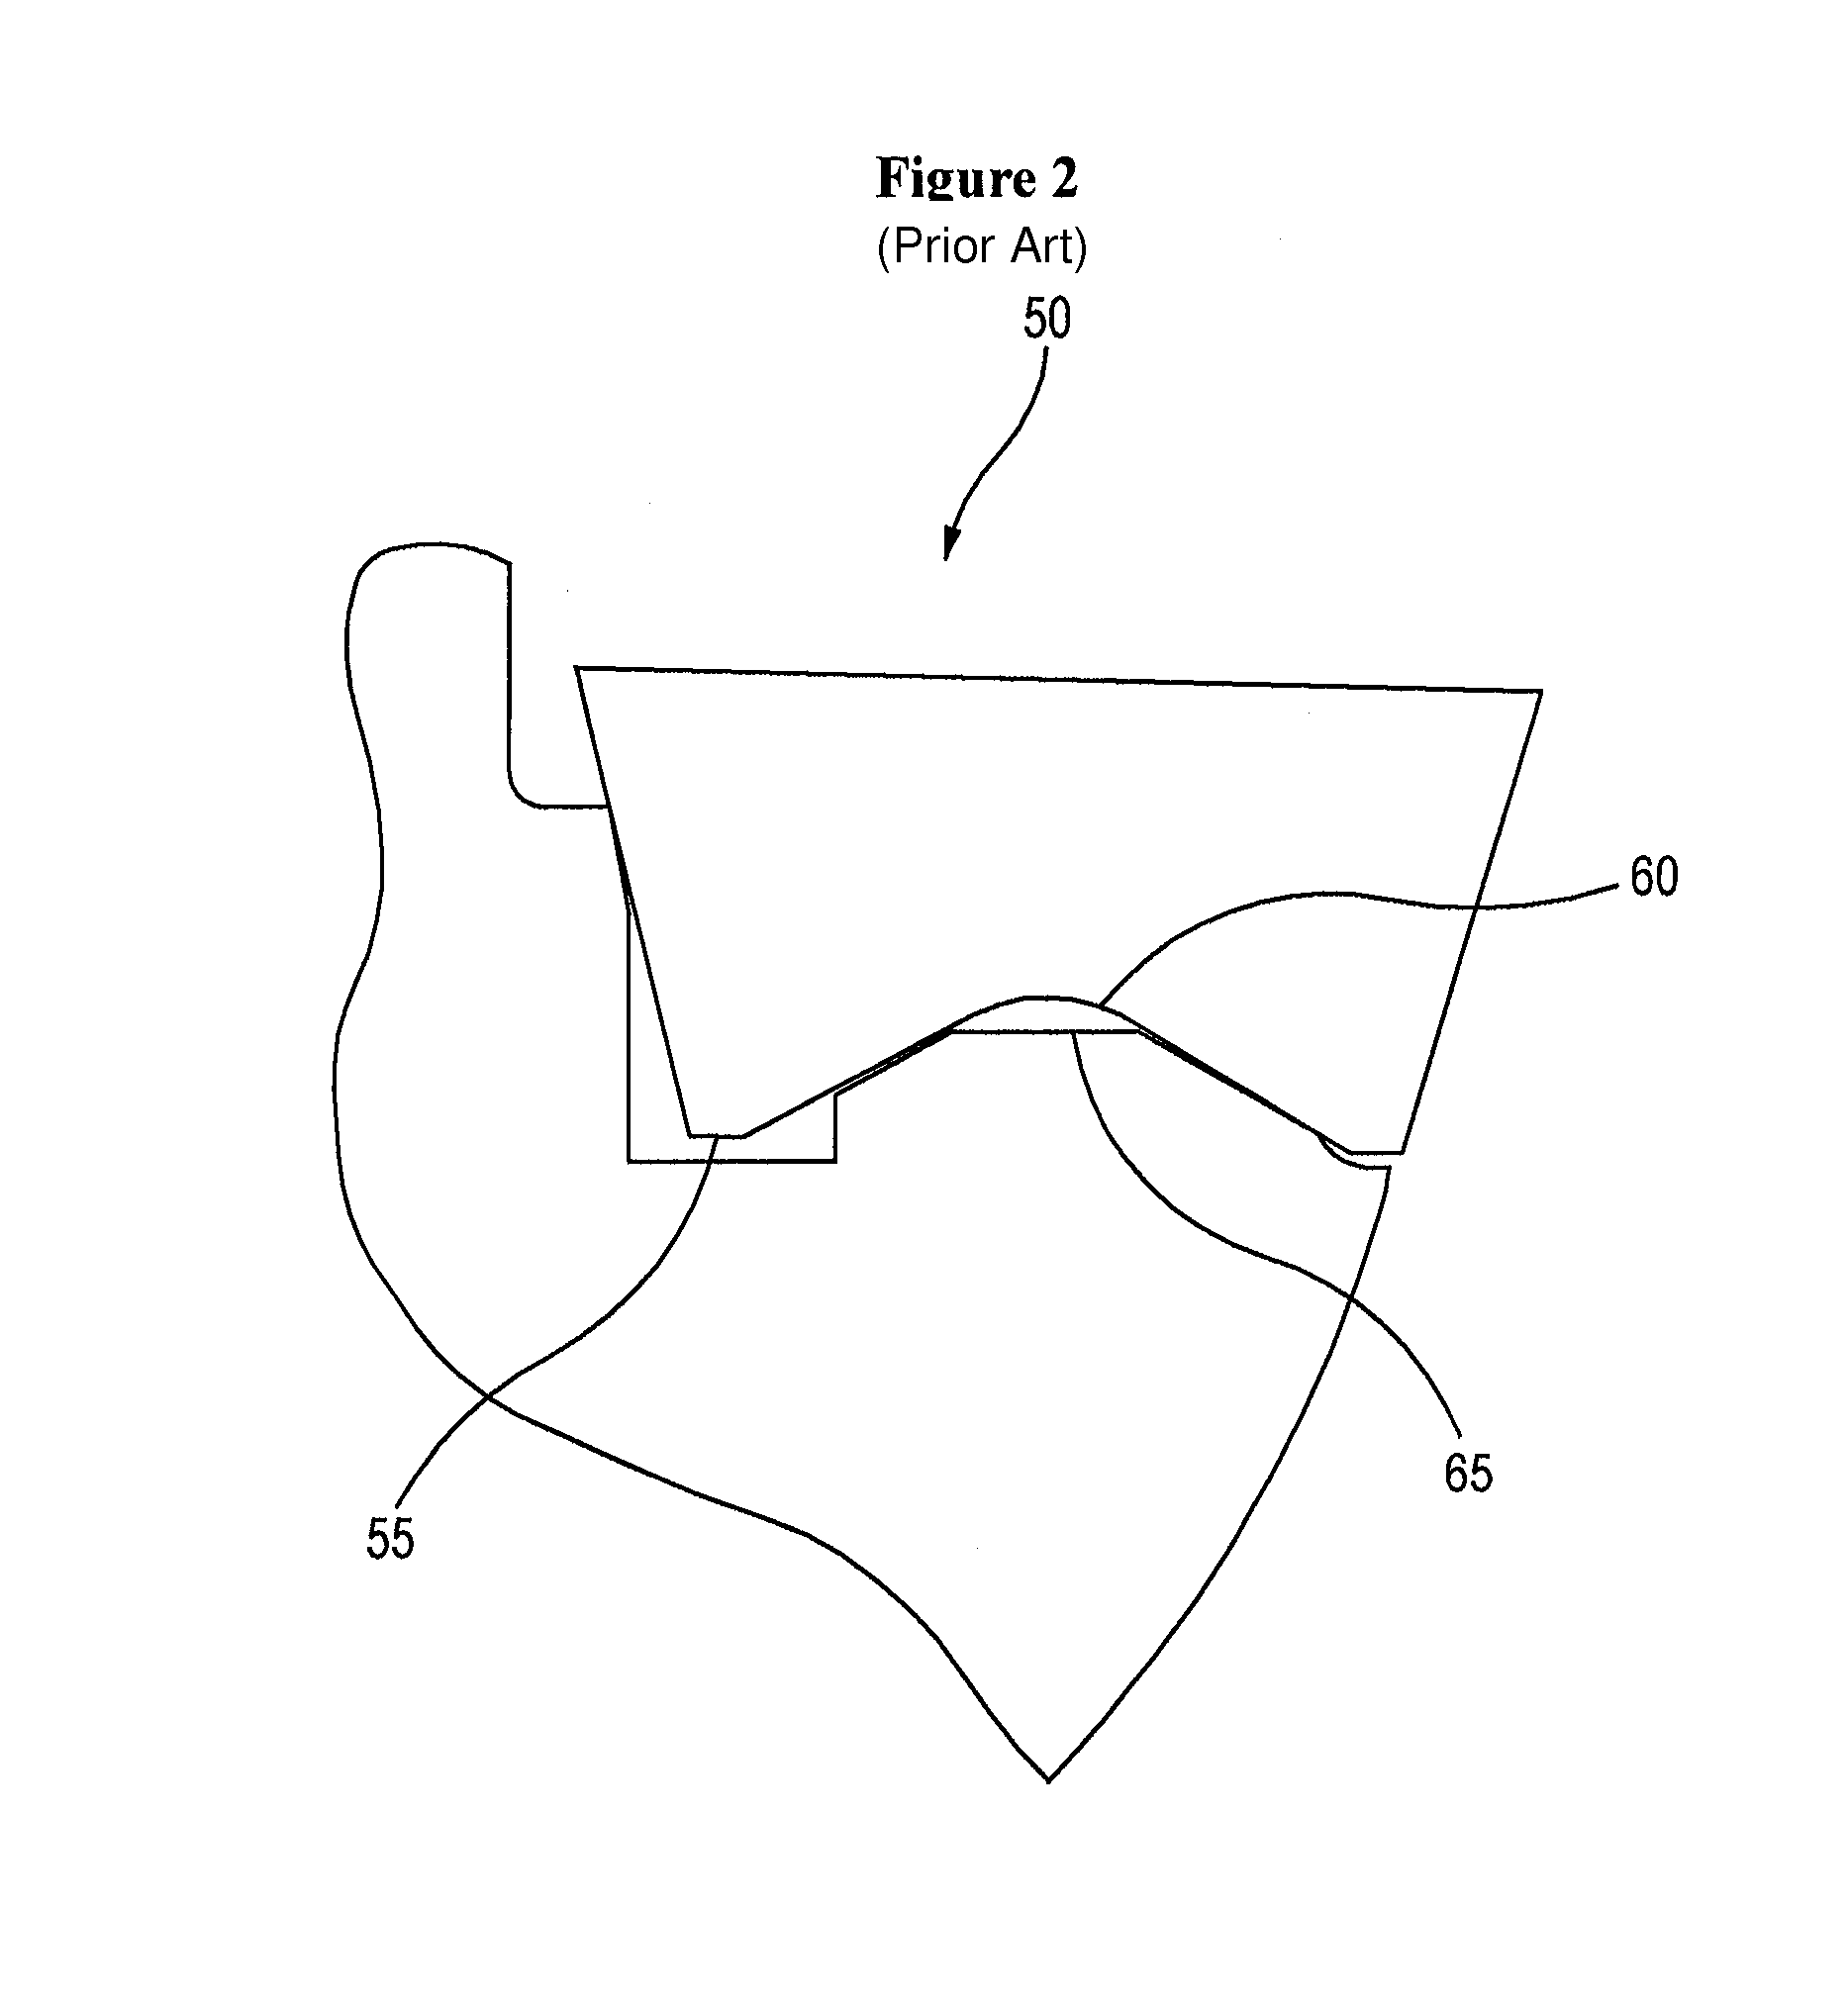 Cutting tool having pocket bottom with base and inclined surfaces